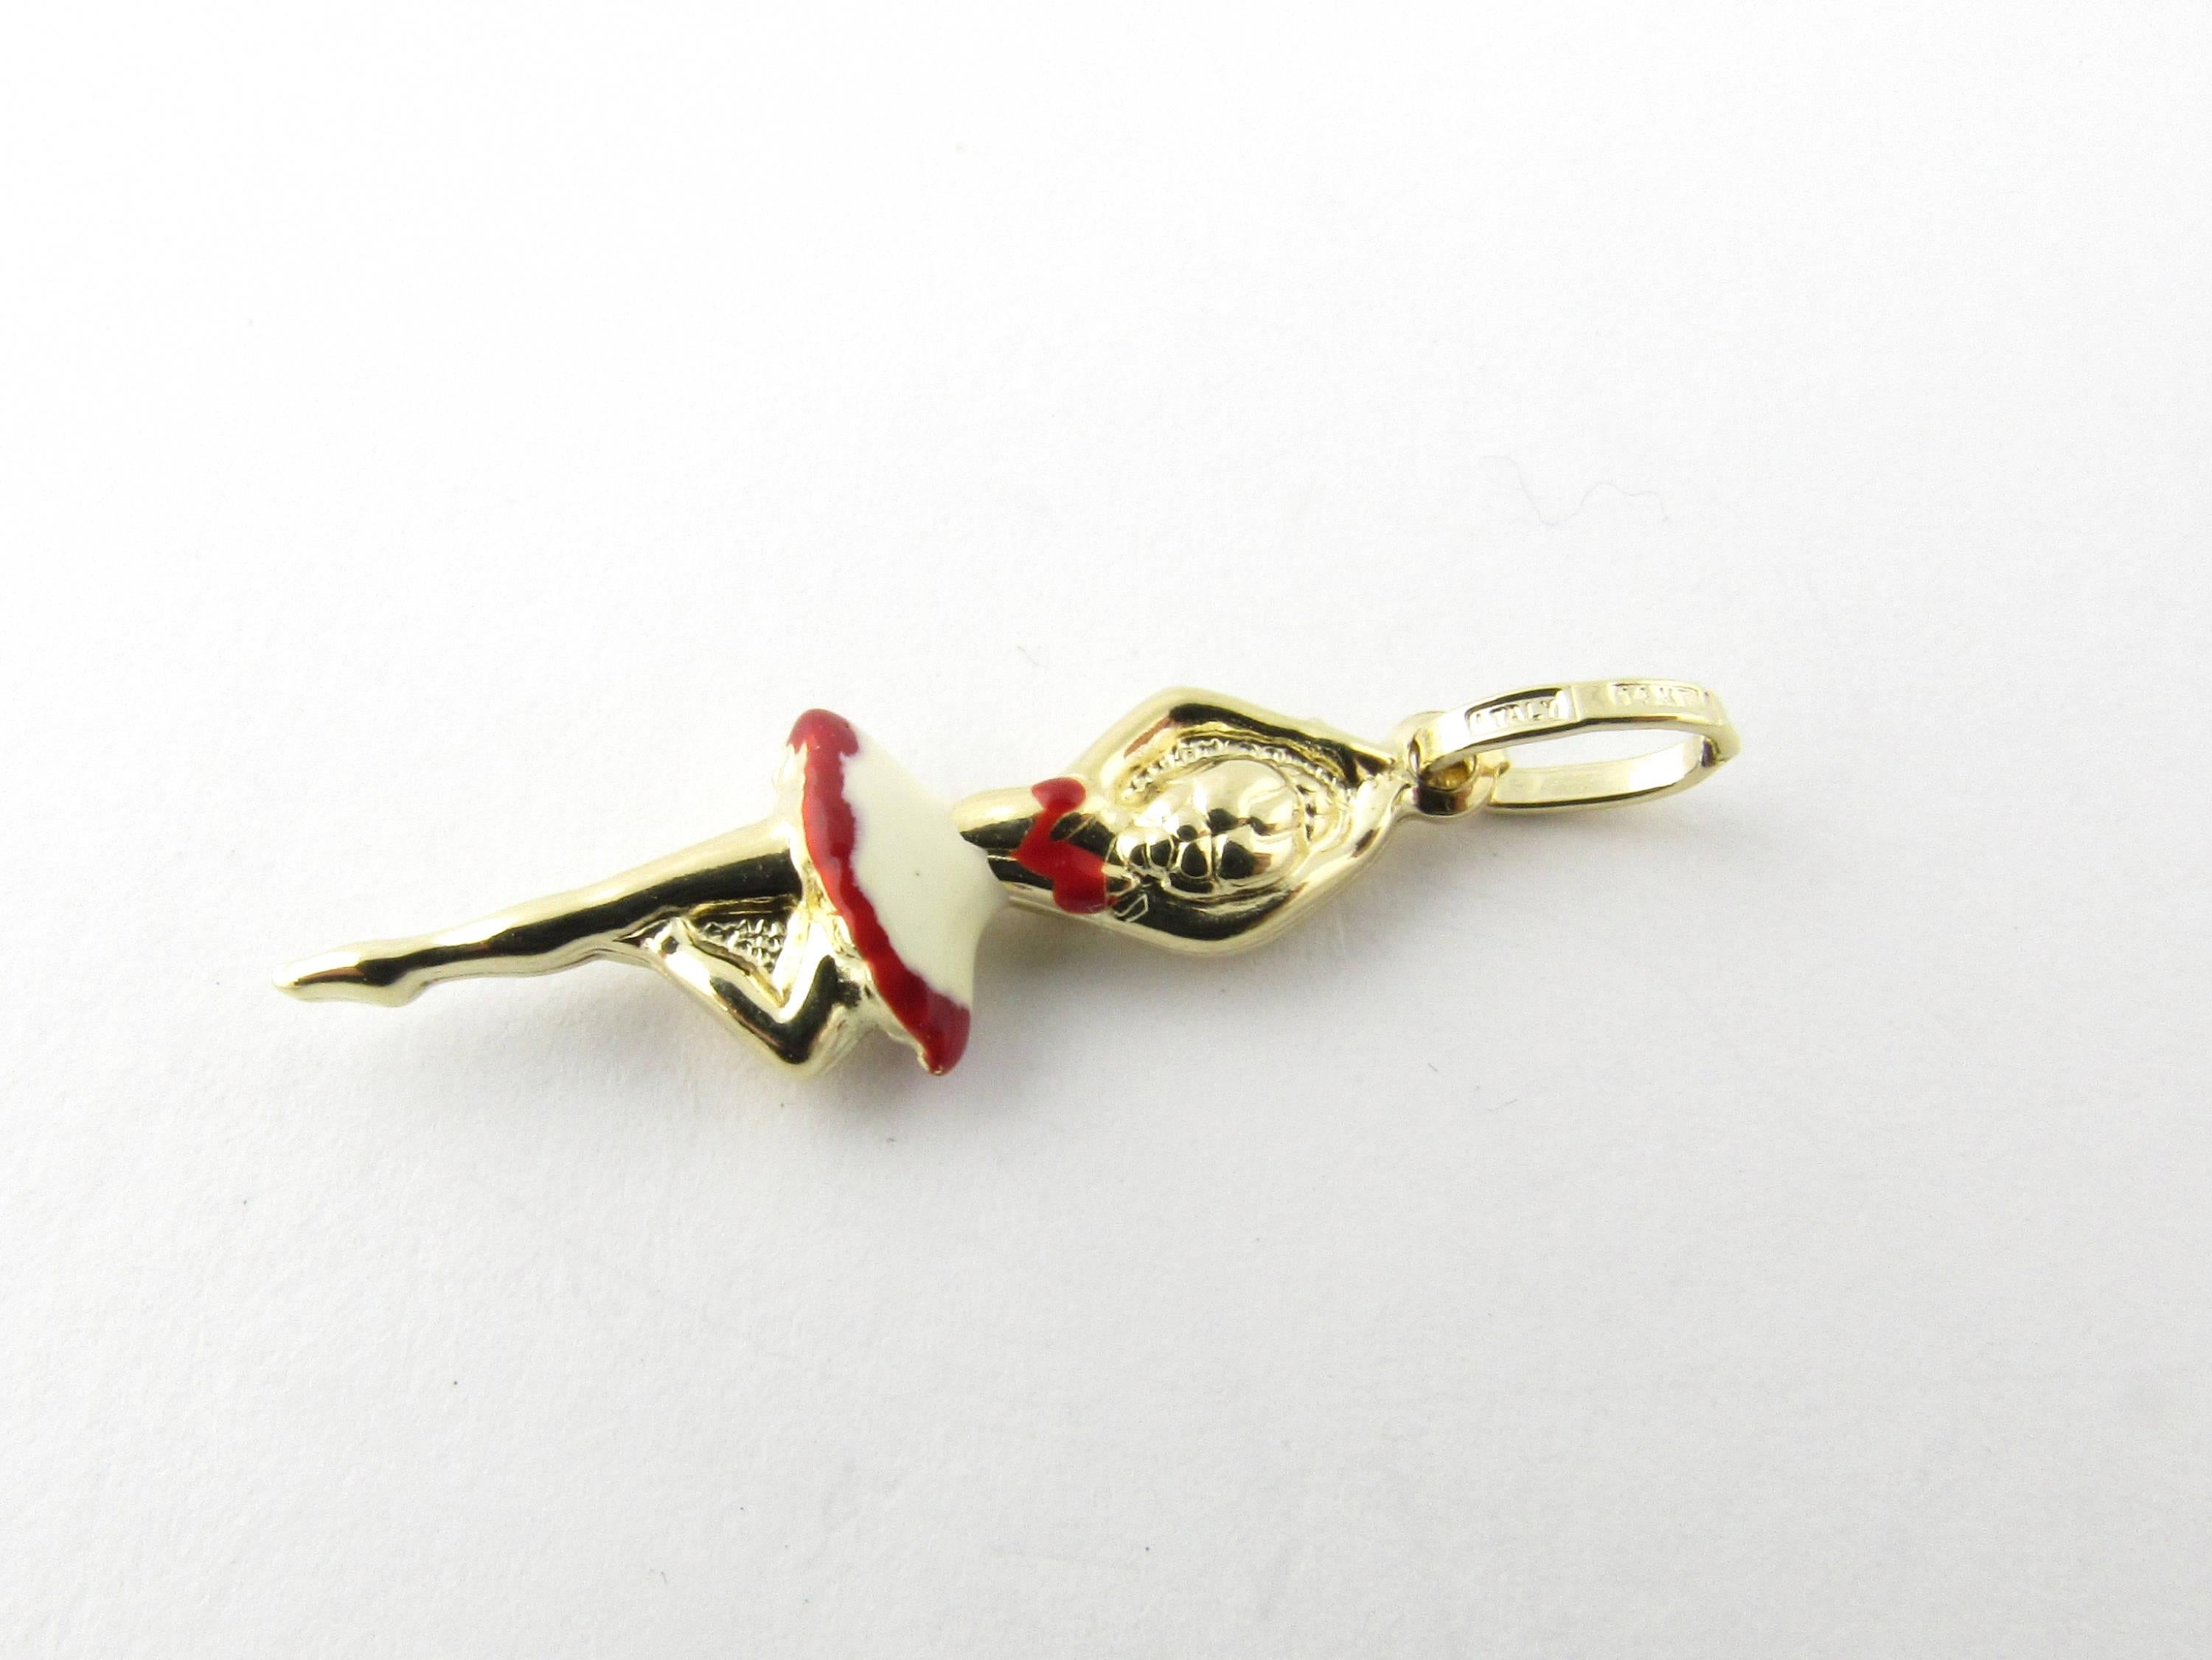 Vintage 14 Karat Yellow Gold Red and White Enamel Ballerina Charm-

Perfect gift for the ballerina in your life!

This lovely 3D charm features a miniature ballerina captured in a graceful pose. Beautifully accented with white and red enamel.

Size: